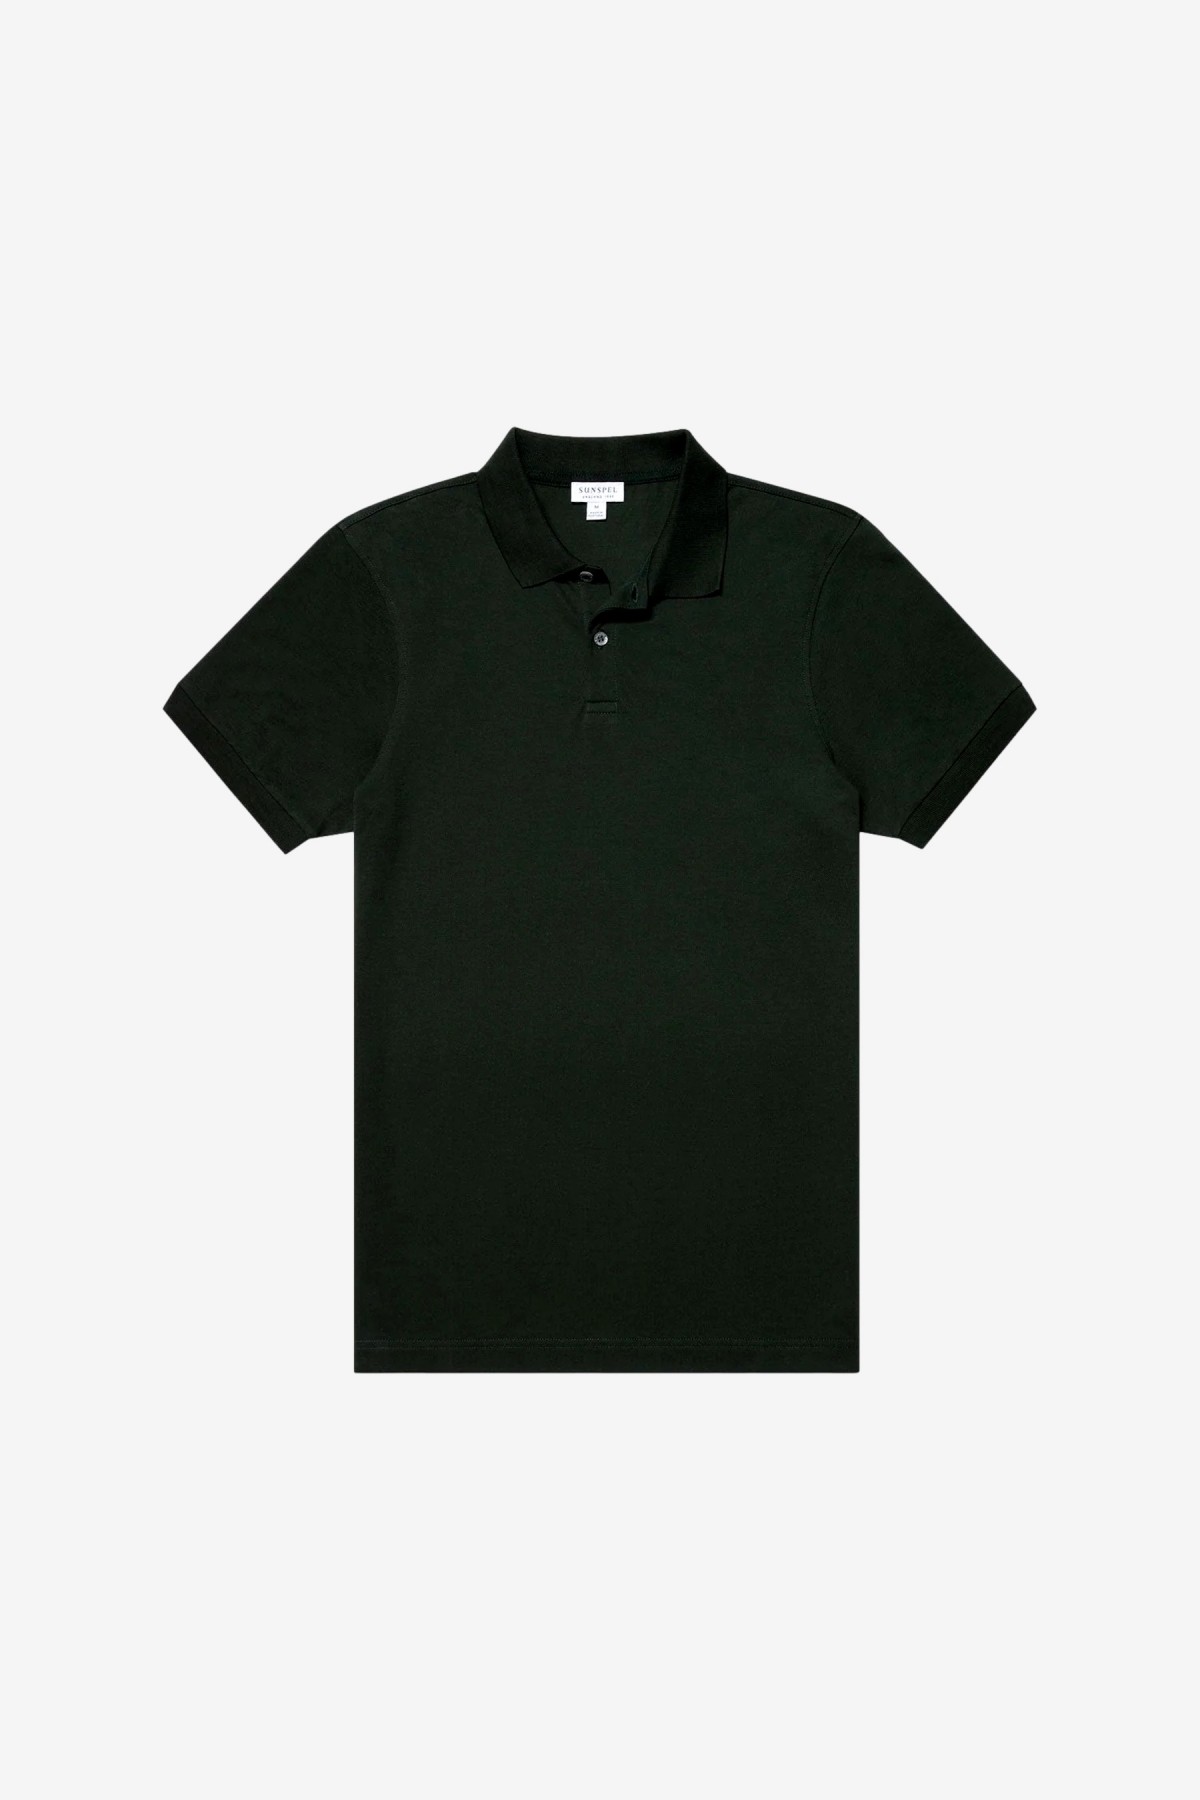 Sunspel Pique Polo Shirt in Seaweed